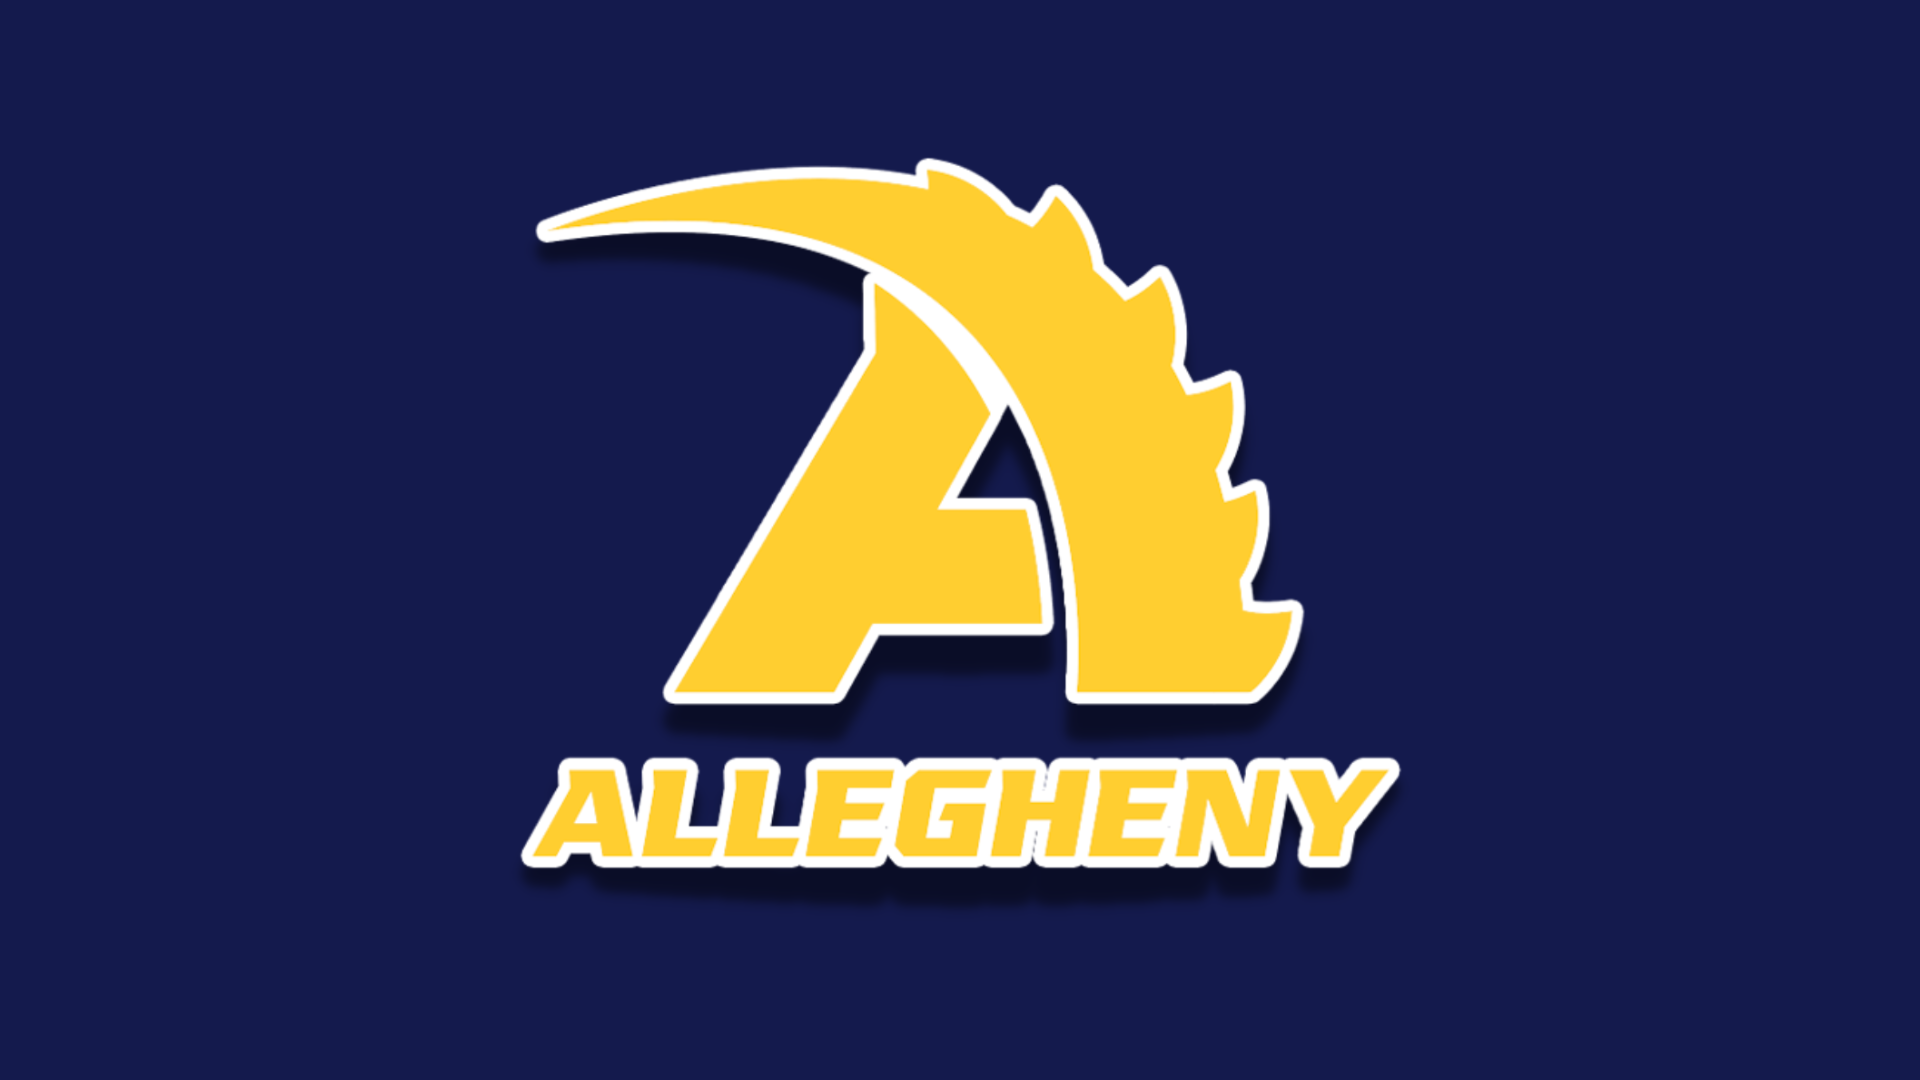 Pat Sullivan named Head Coach for Men’s Basketball at D3 Allegheny College